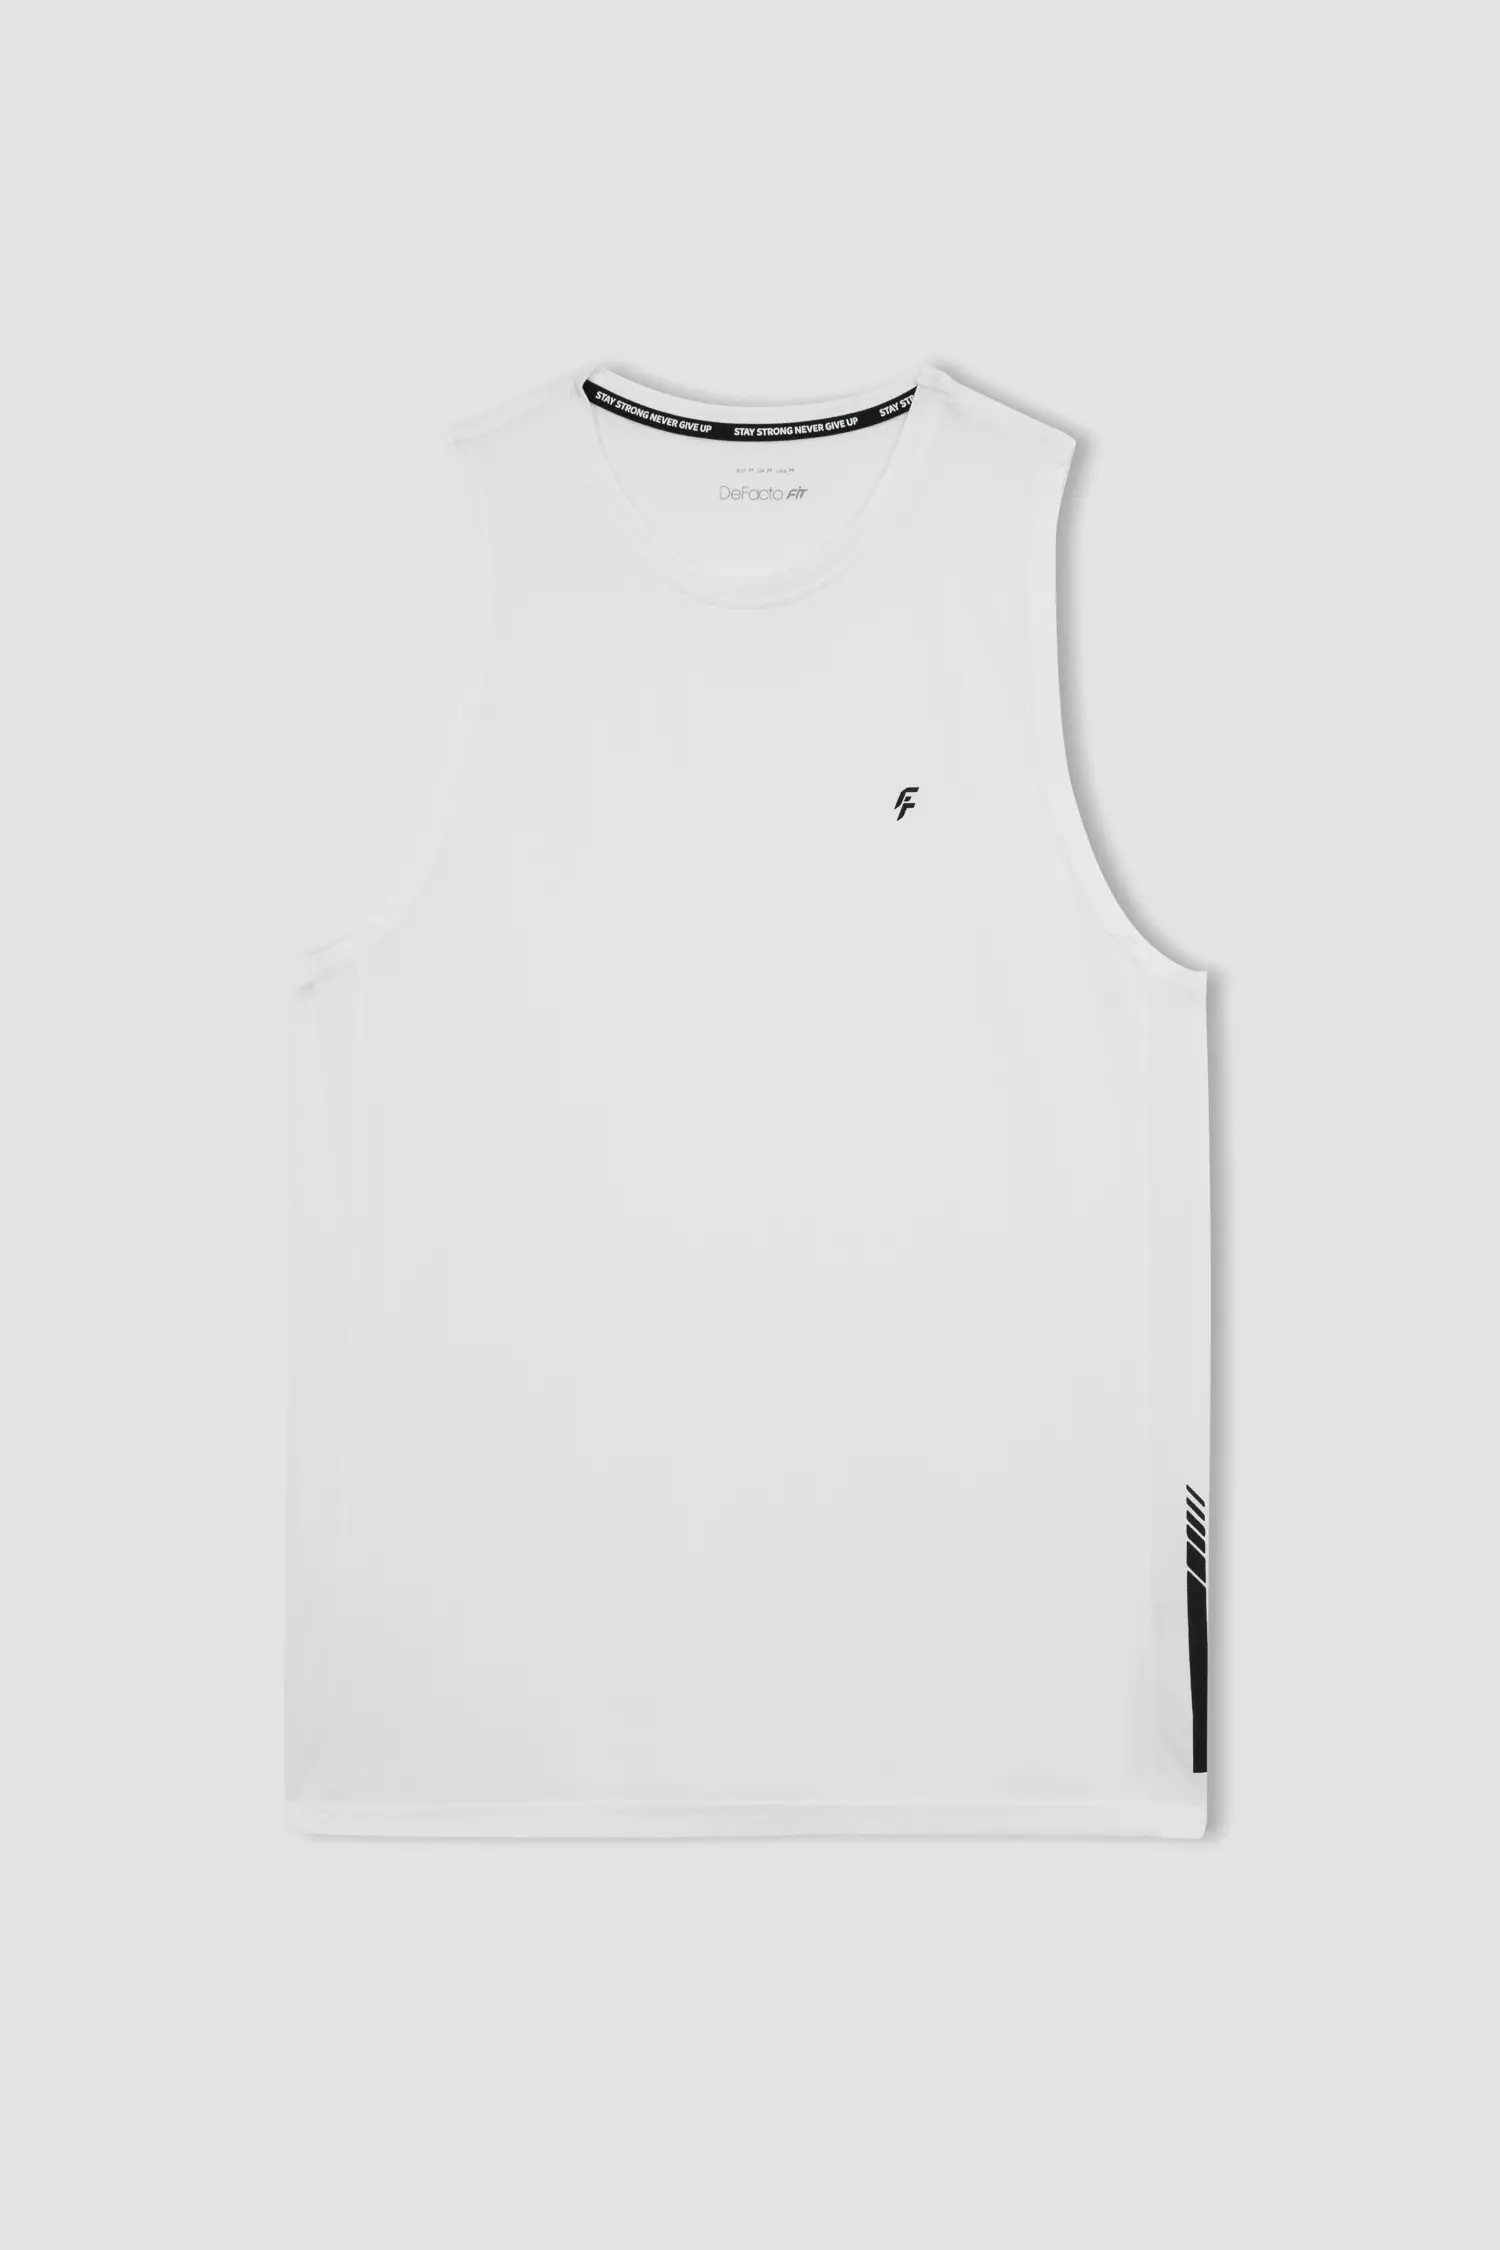 Buy DeFacto 2-Pack Regular Fit Basic Sleeveless Cotton Singlets in